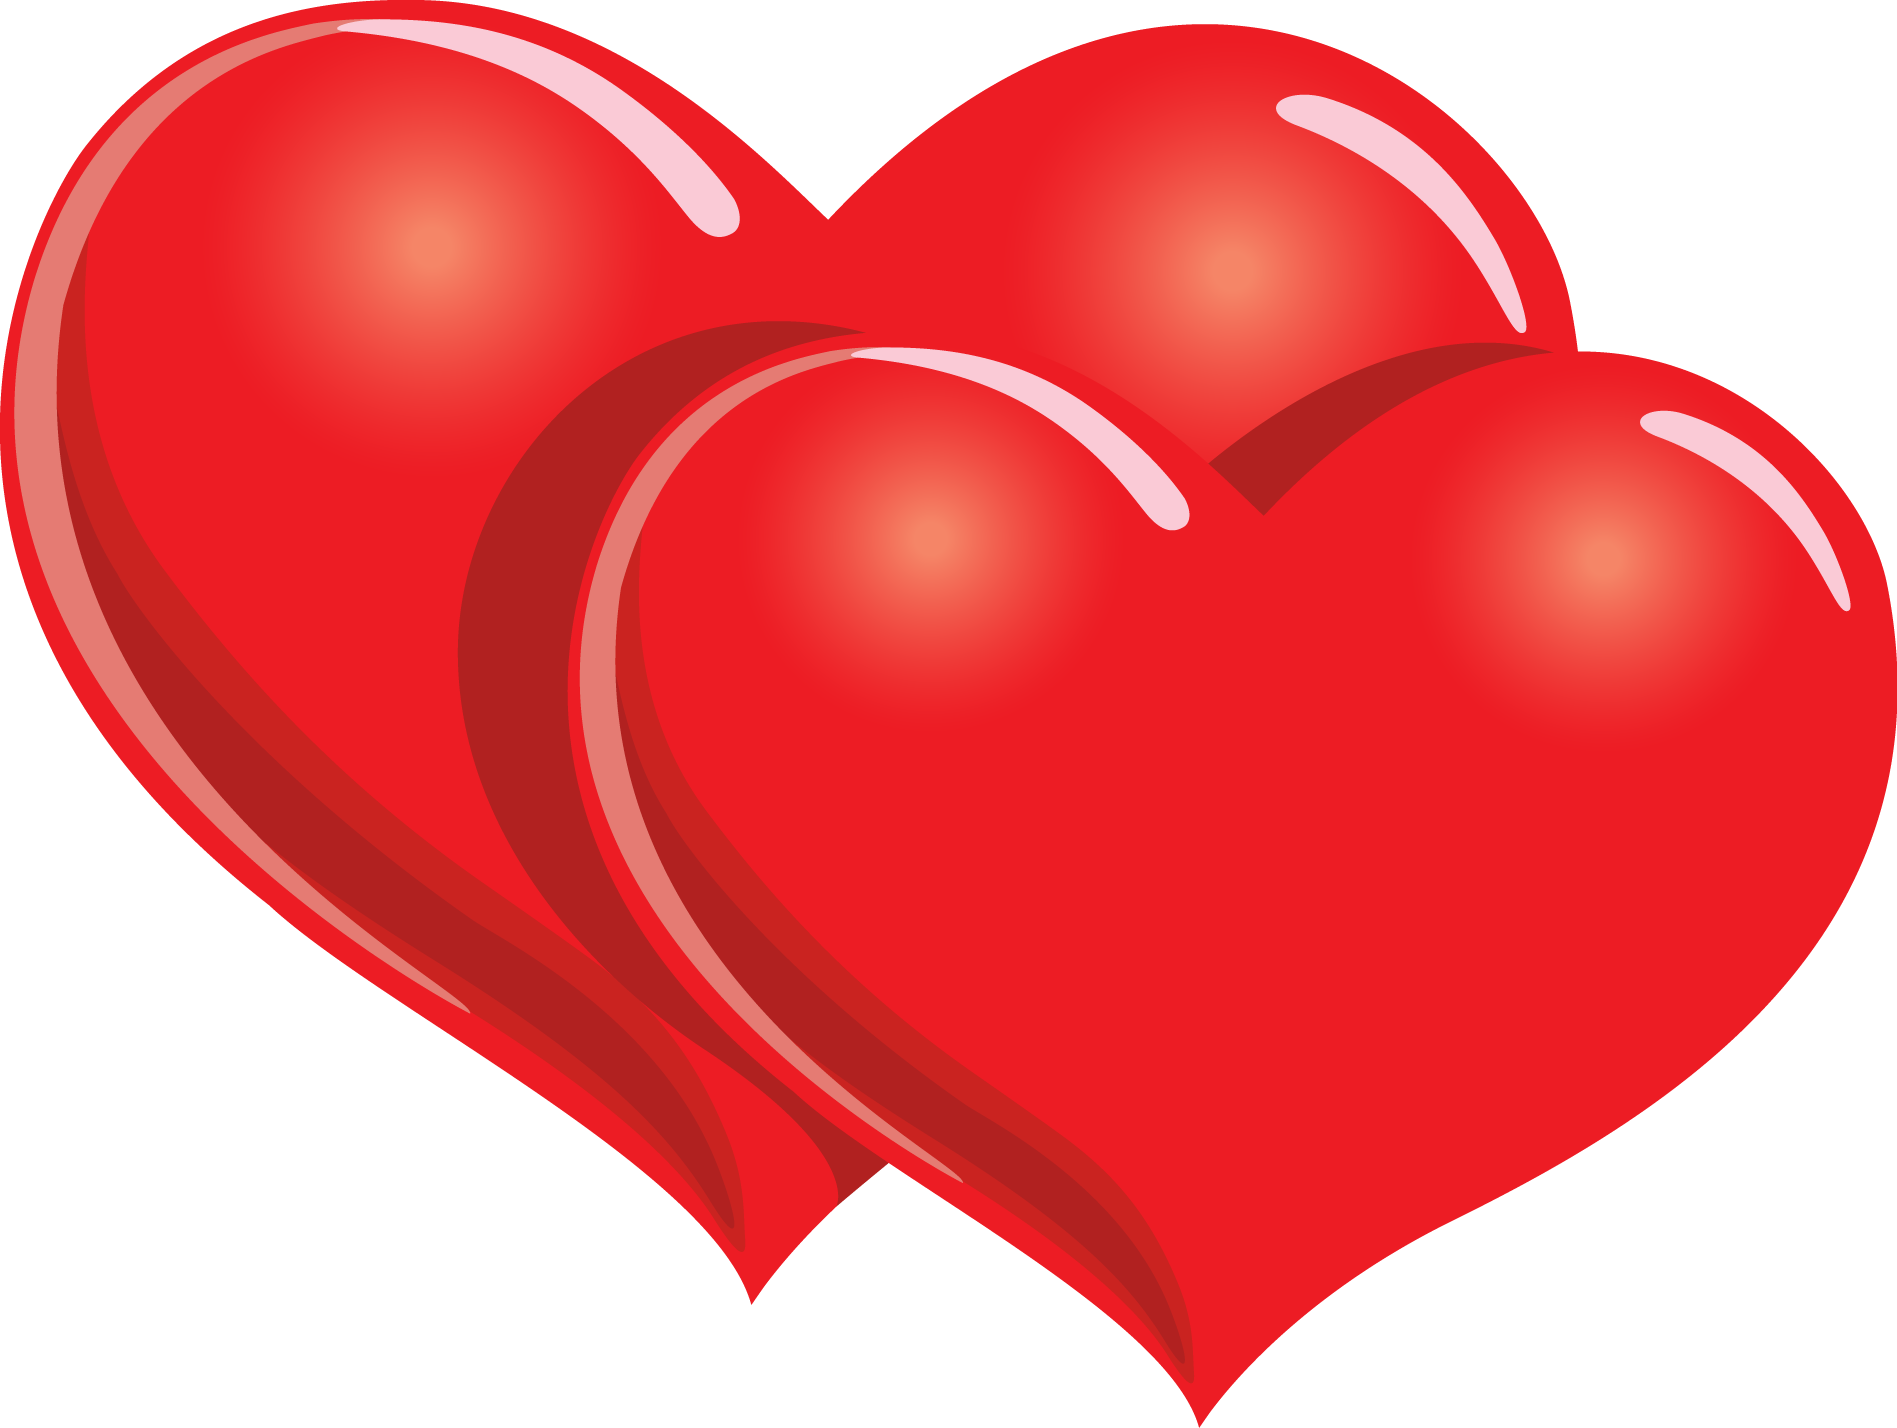 Two Hearts Clip Art - ClipArt Best